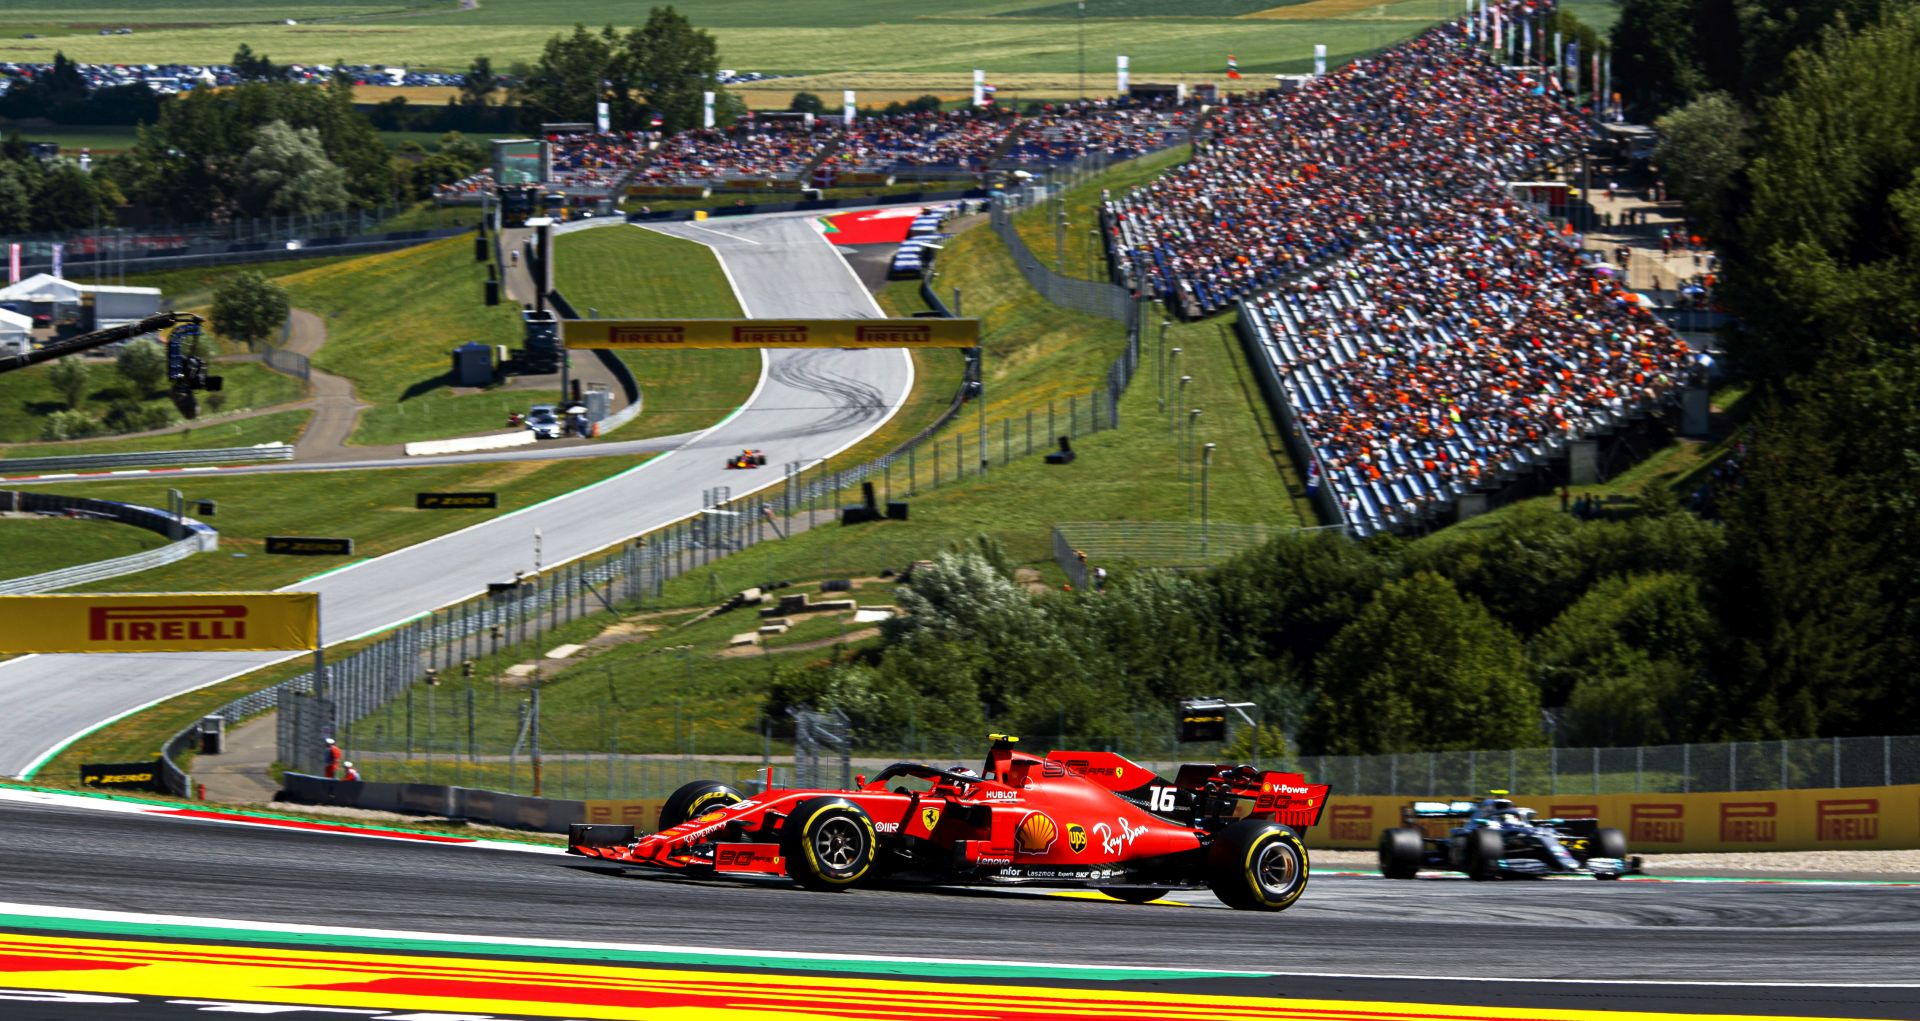 epa08386132 (FILE) - Monaco's Formula One driver Charles Leclerc of Scuderia Ferrari in action during the second practice session of the Austrian Formula One GP at the Red Bull Ring circuit in Spielberg, Austria, 28 June 2019 (re-issued 27 April 2020). Formula 1 Group CEO Chase Carey posted a statement on the Formula 1 website on 27 April 2020 saying that the series is targeting to start the season by the beginning of July with the Austrian Grand Prix in Spielberg on 3-5 July being the first race.  EPA/VALDRIN XHEMAJ *** Local Caption *** 55305392